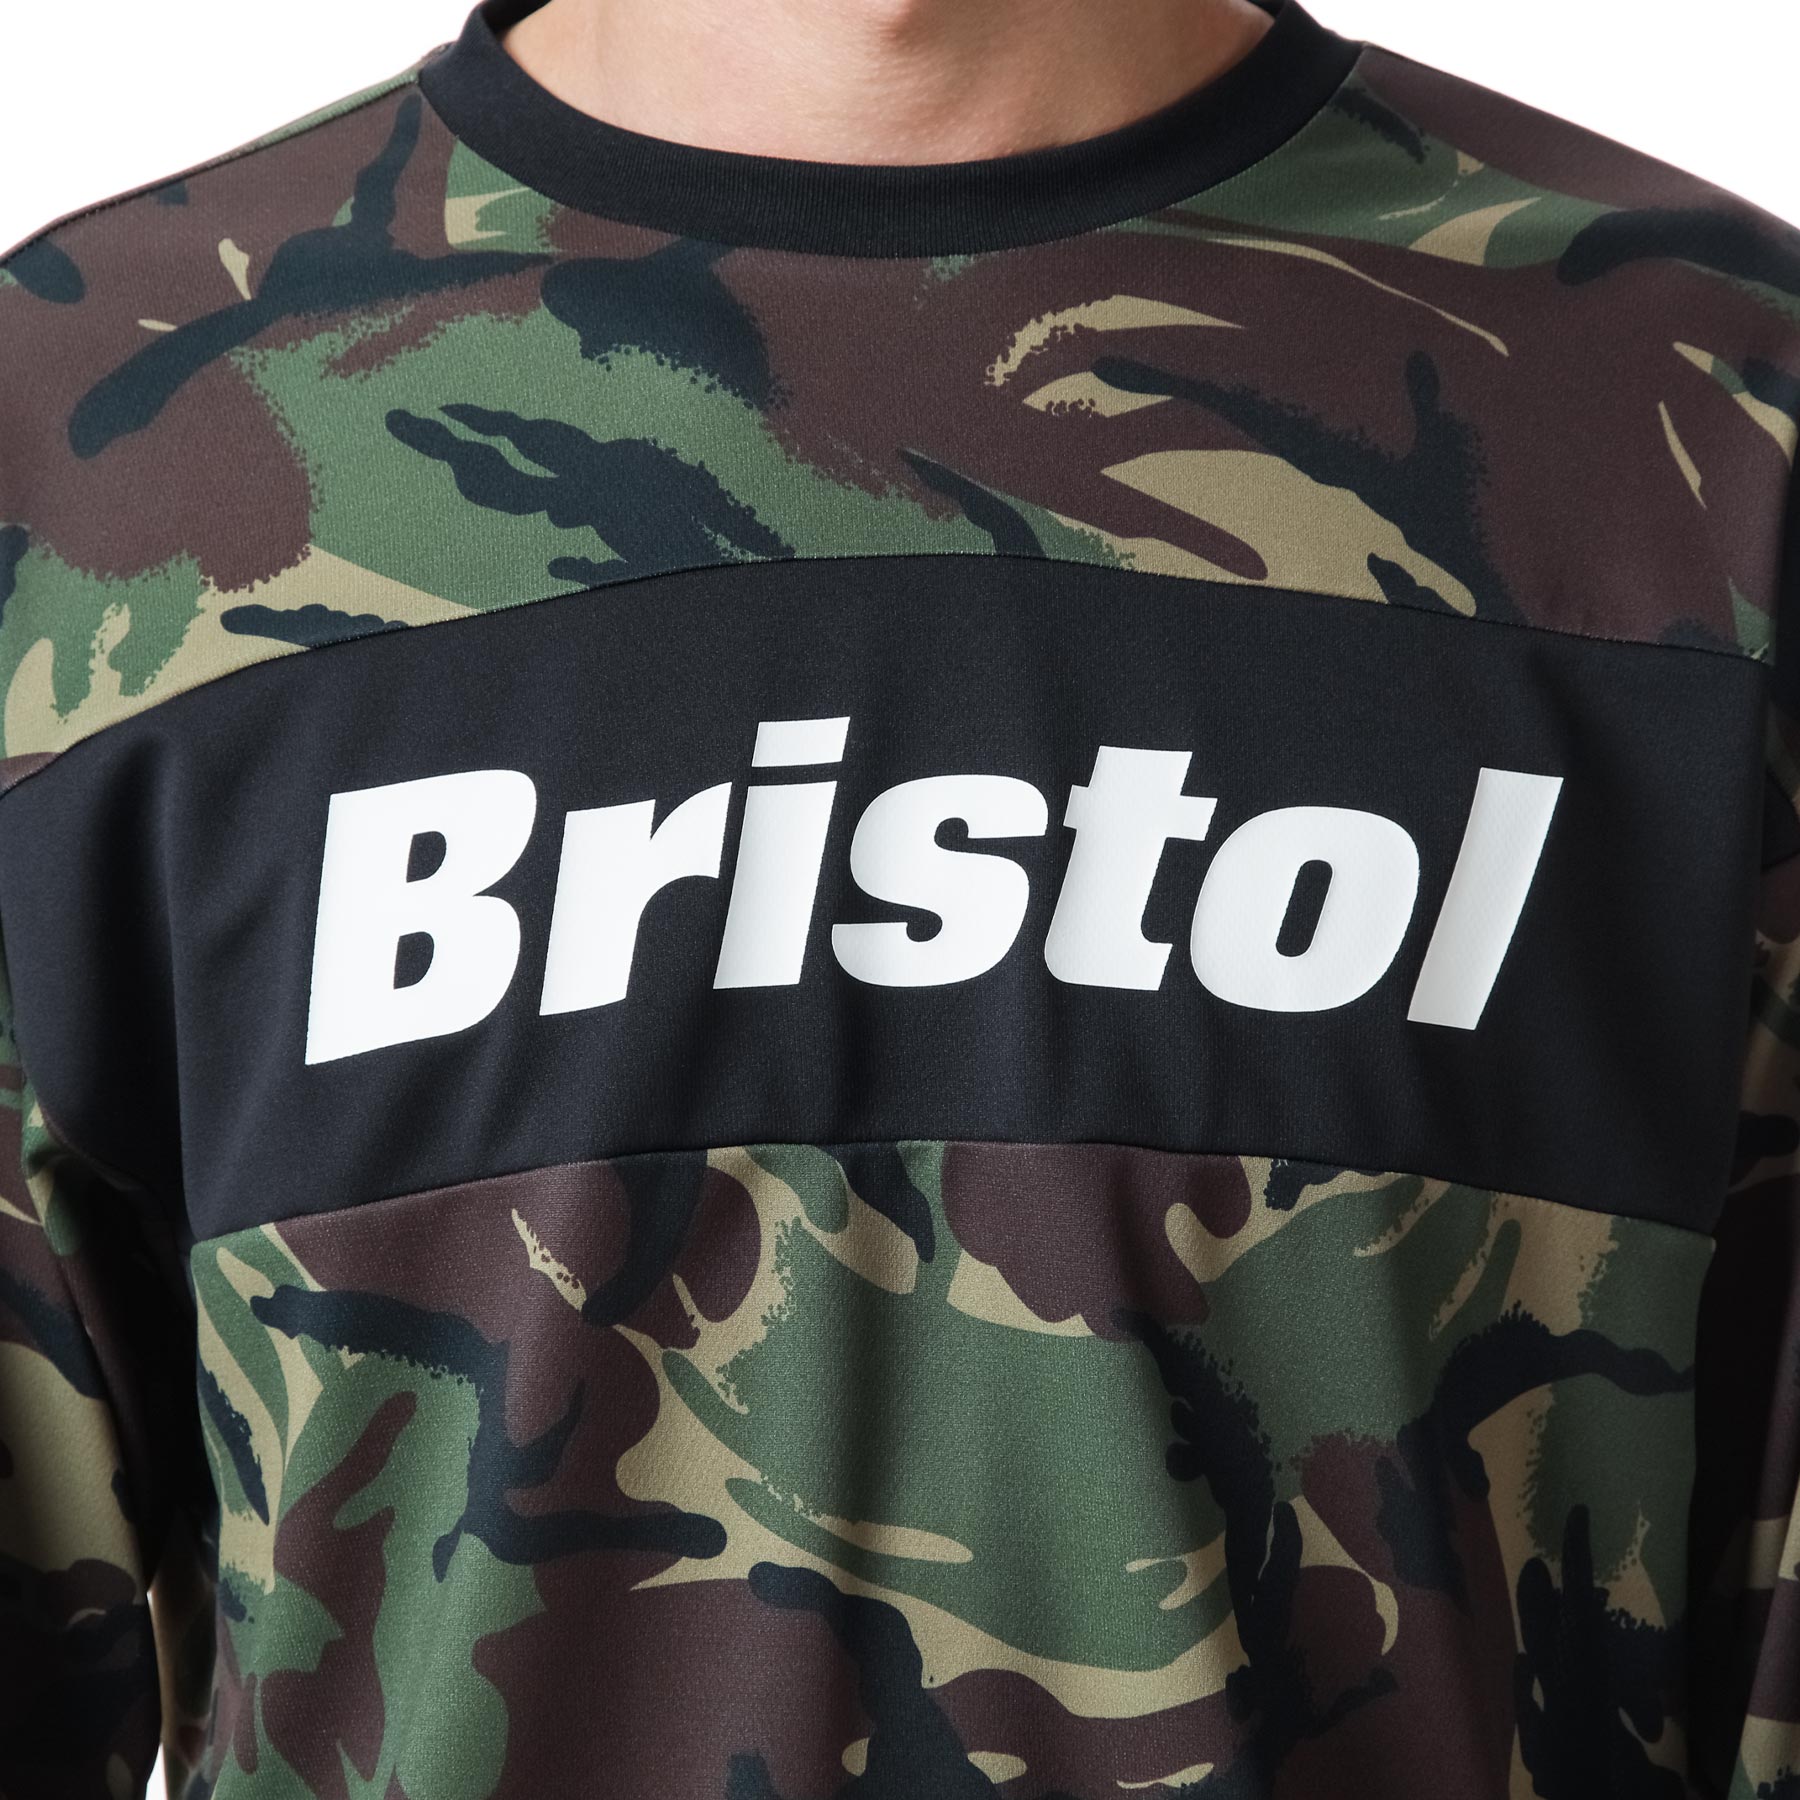 FCRB L S camouflage team top